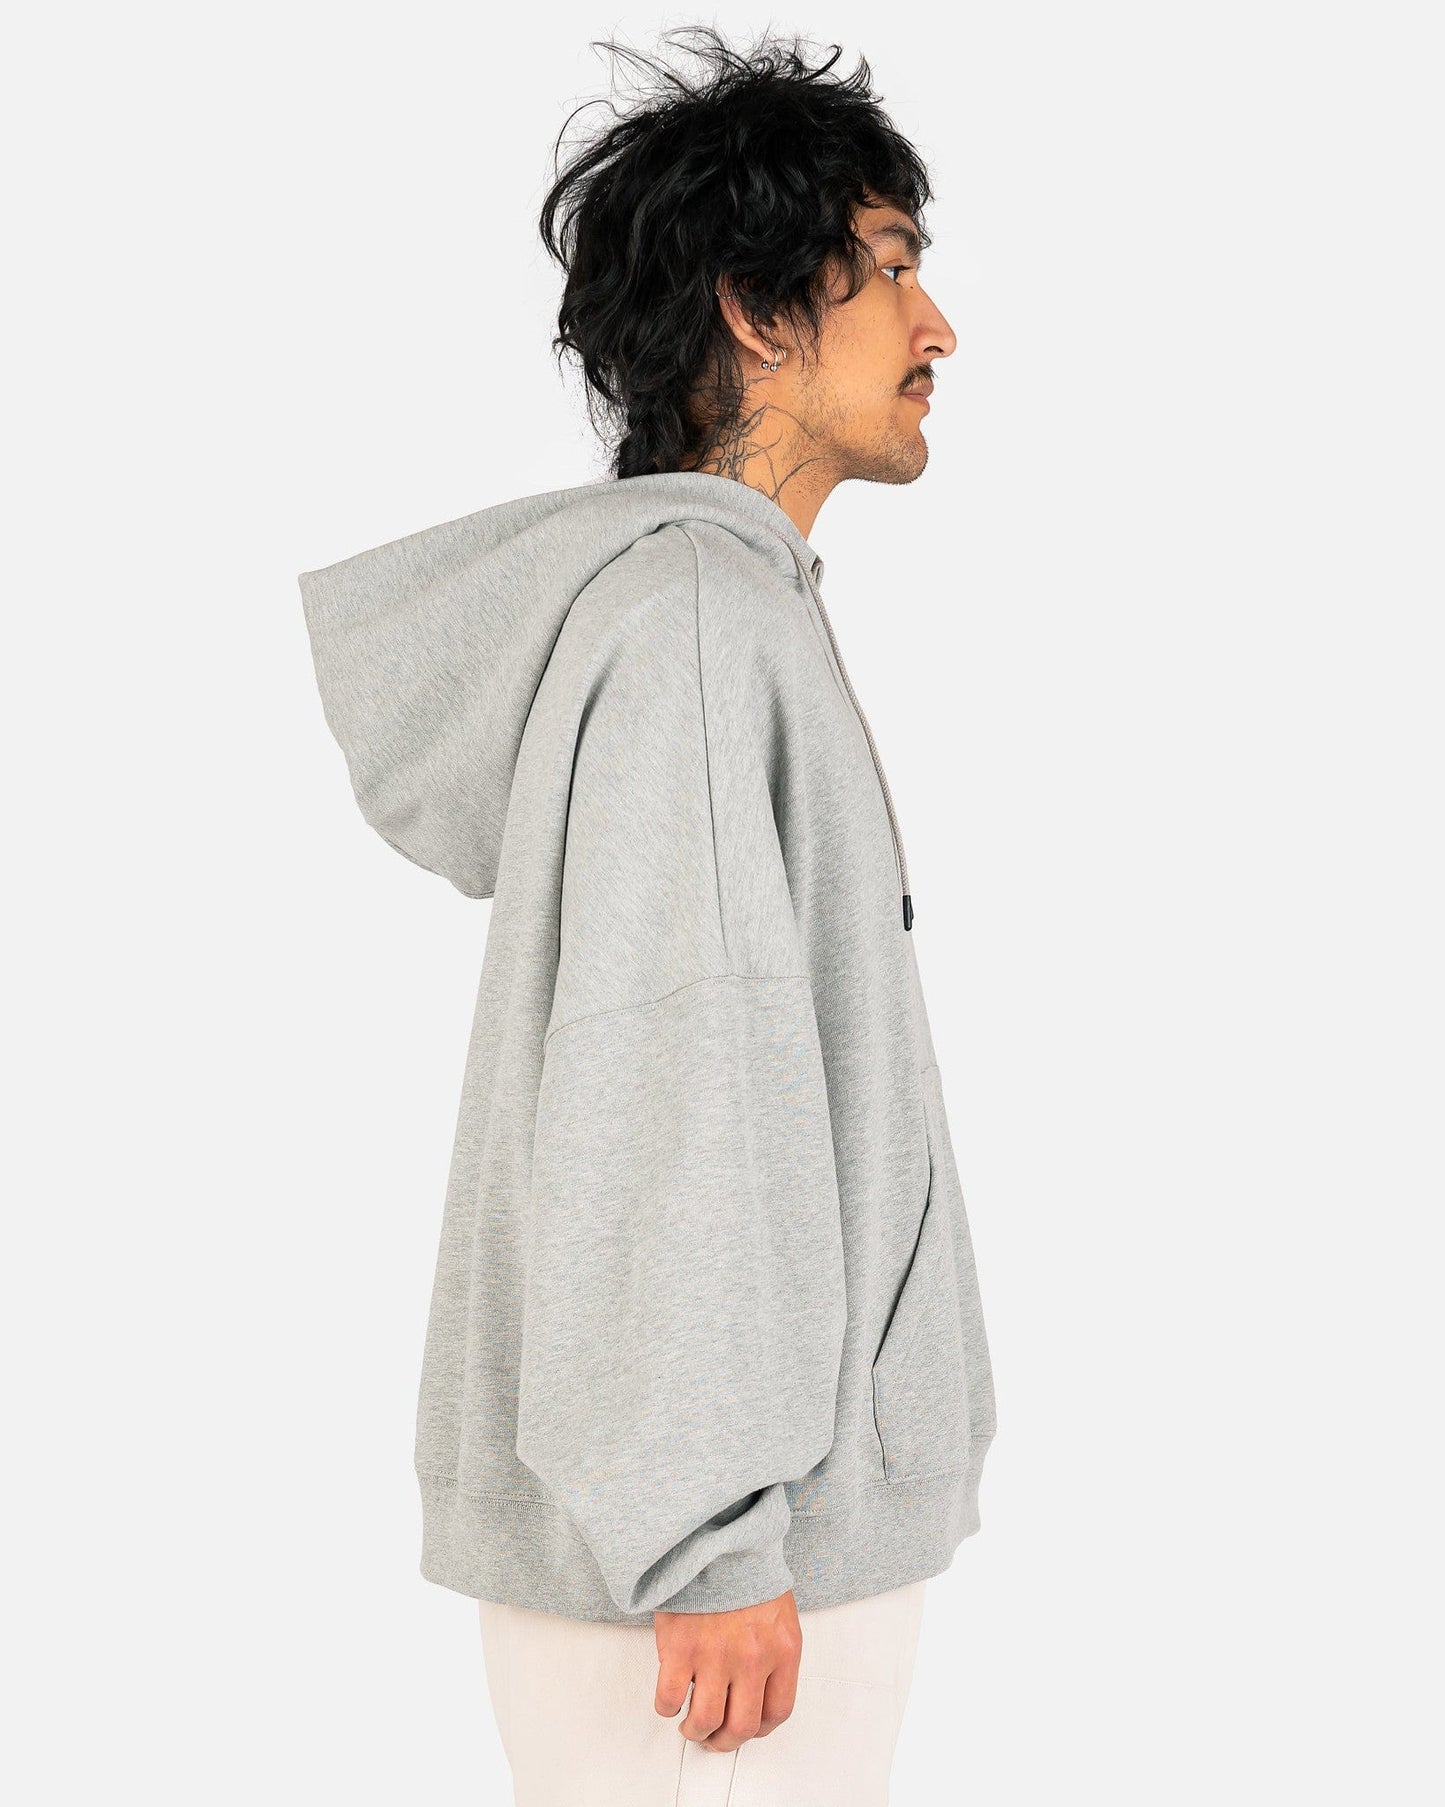 Willy Chavarria Ripped Neck Bomber Hoodie in Heather Grey